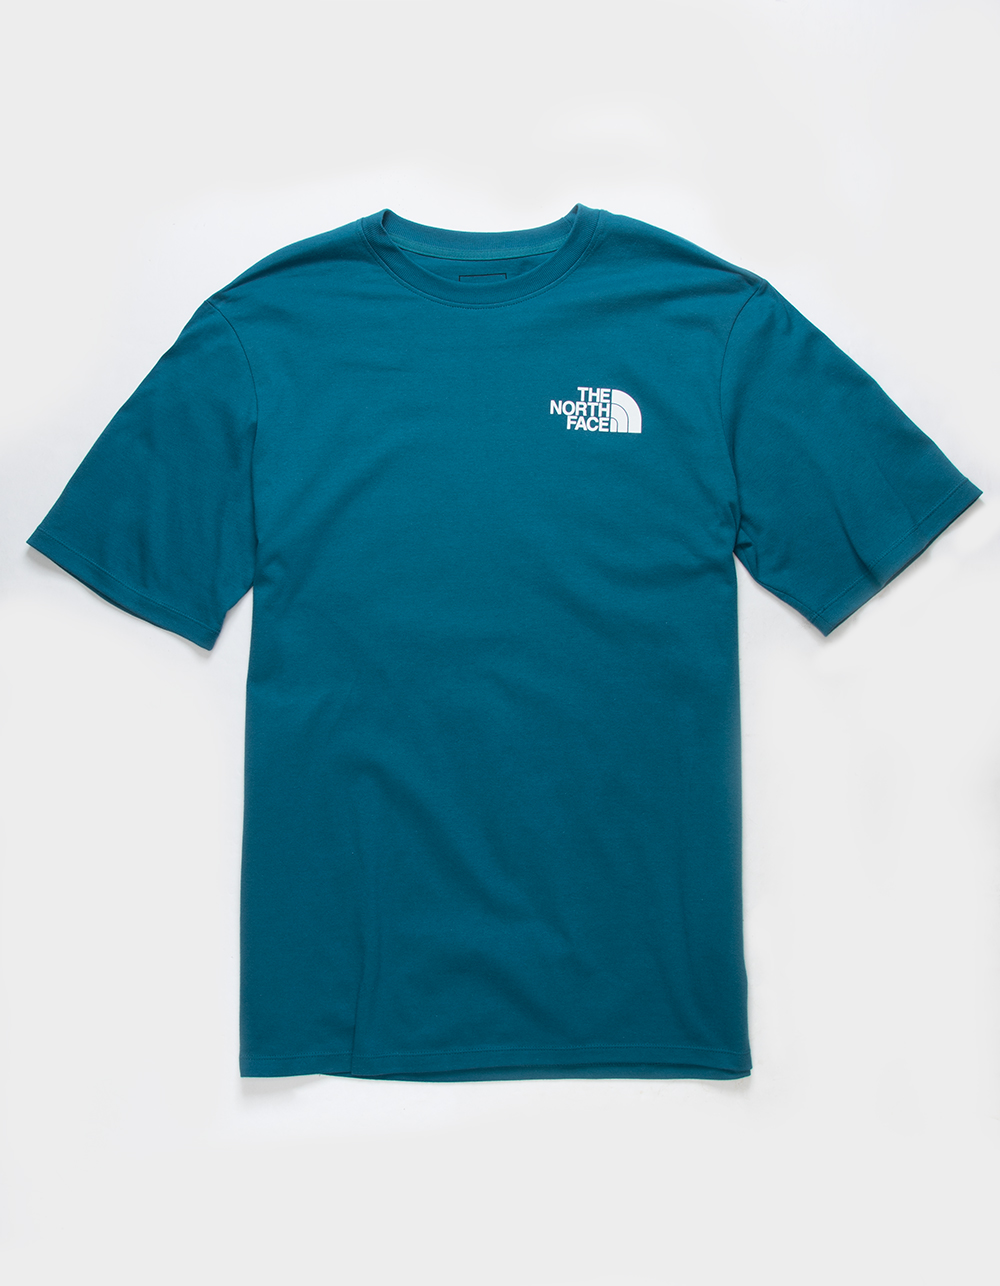 THE NORTH FACE Coordinates Mens Tee - BLUE | Tillys